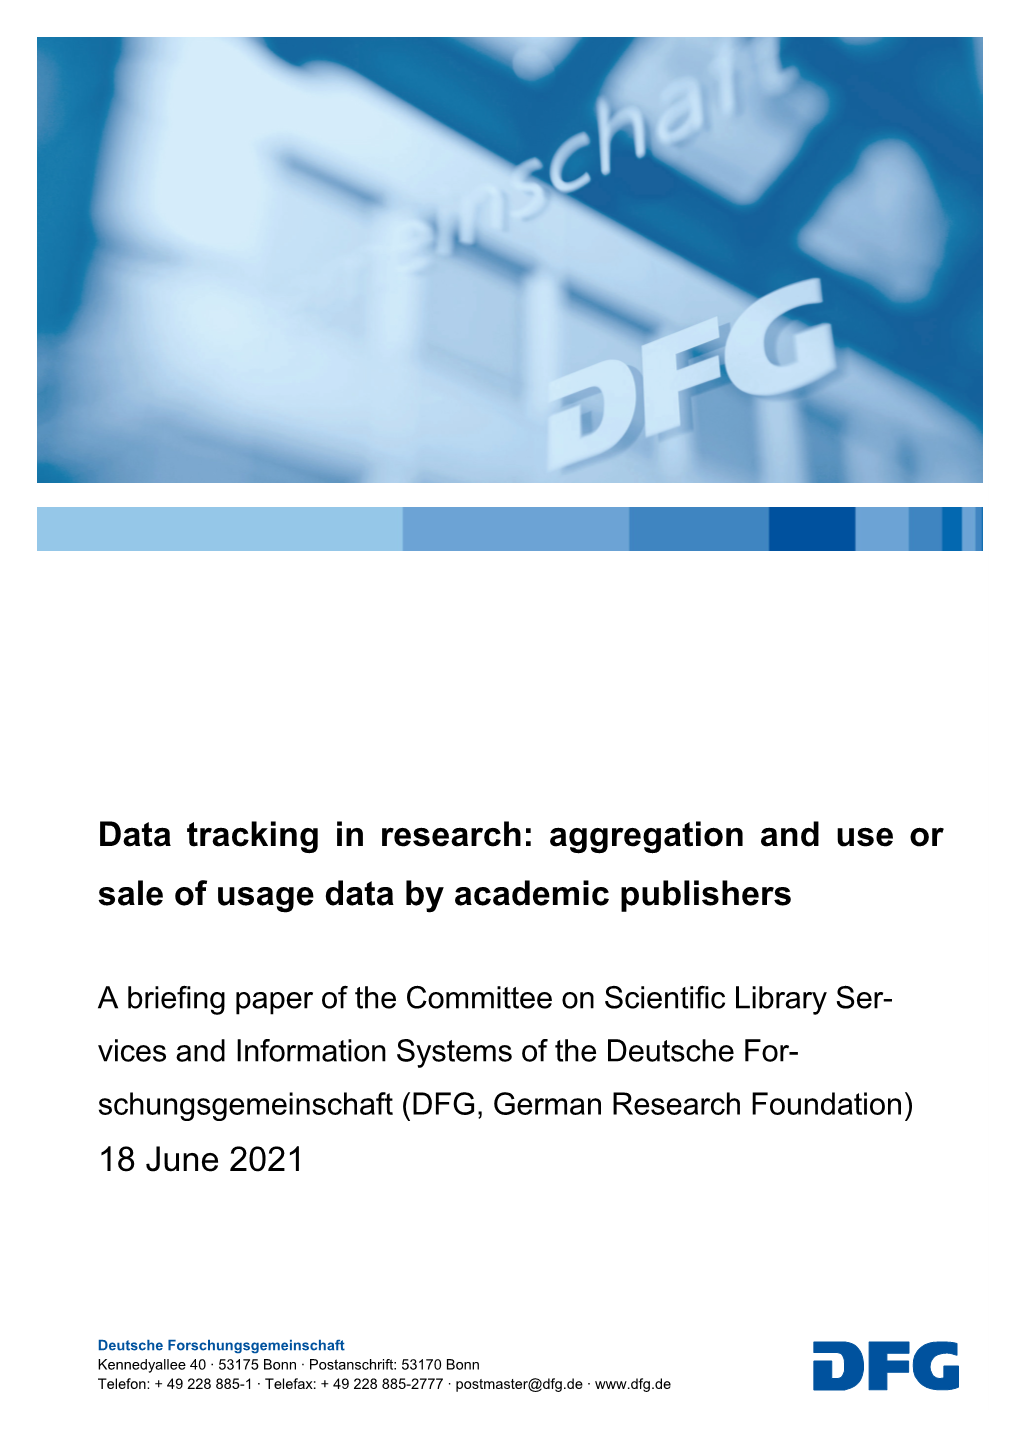 Data Tracking in Research: Aggregation and Use Or Sale of Usage Data by Academic Publishers